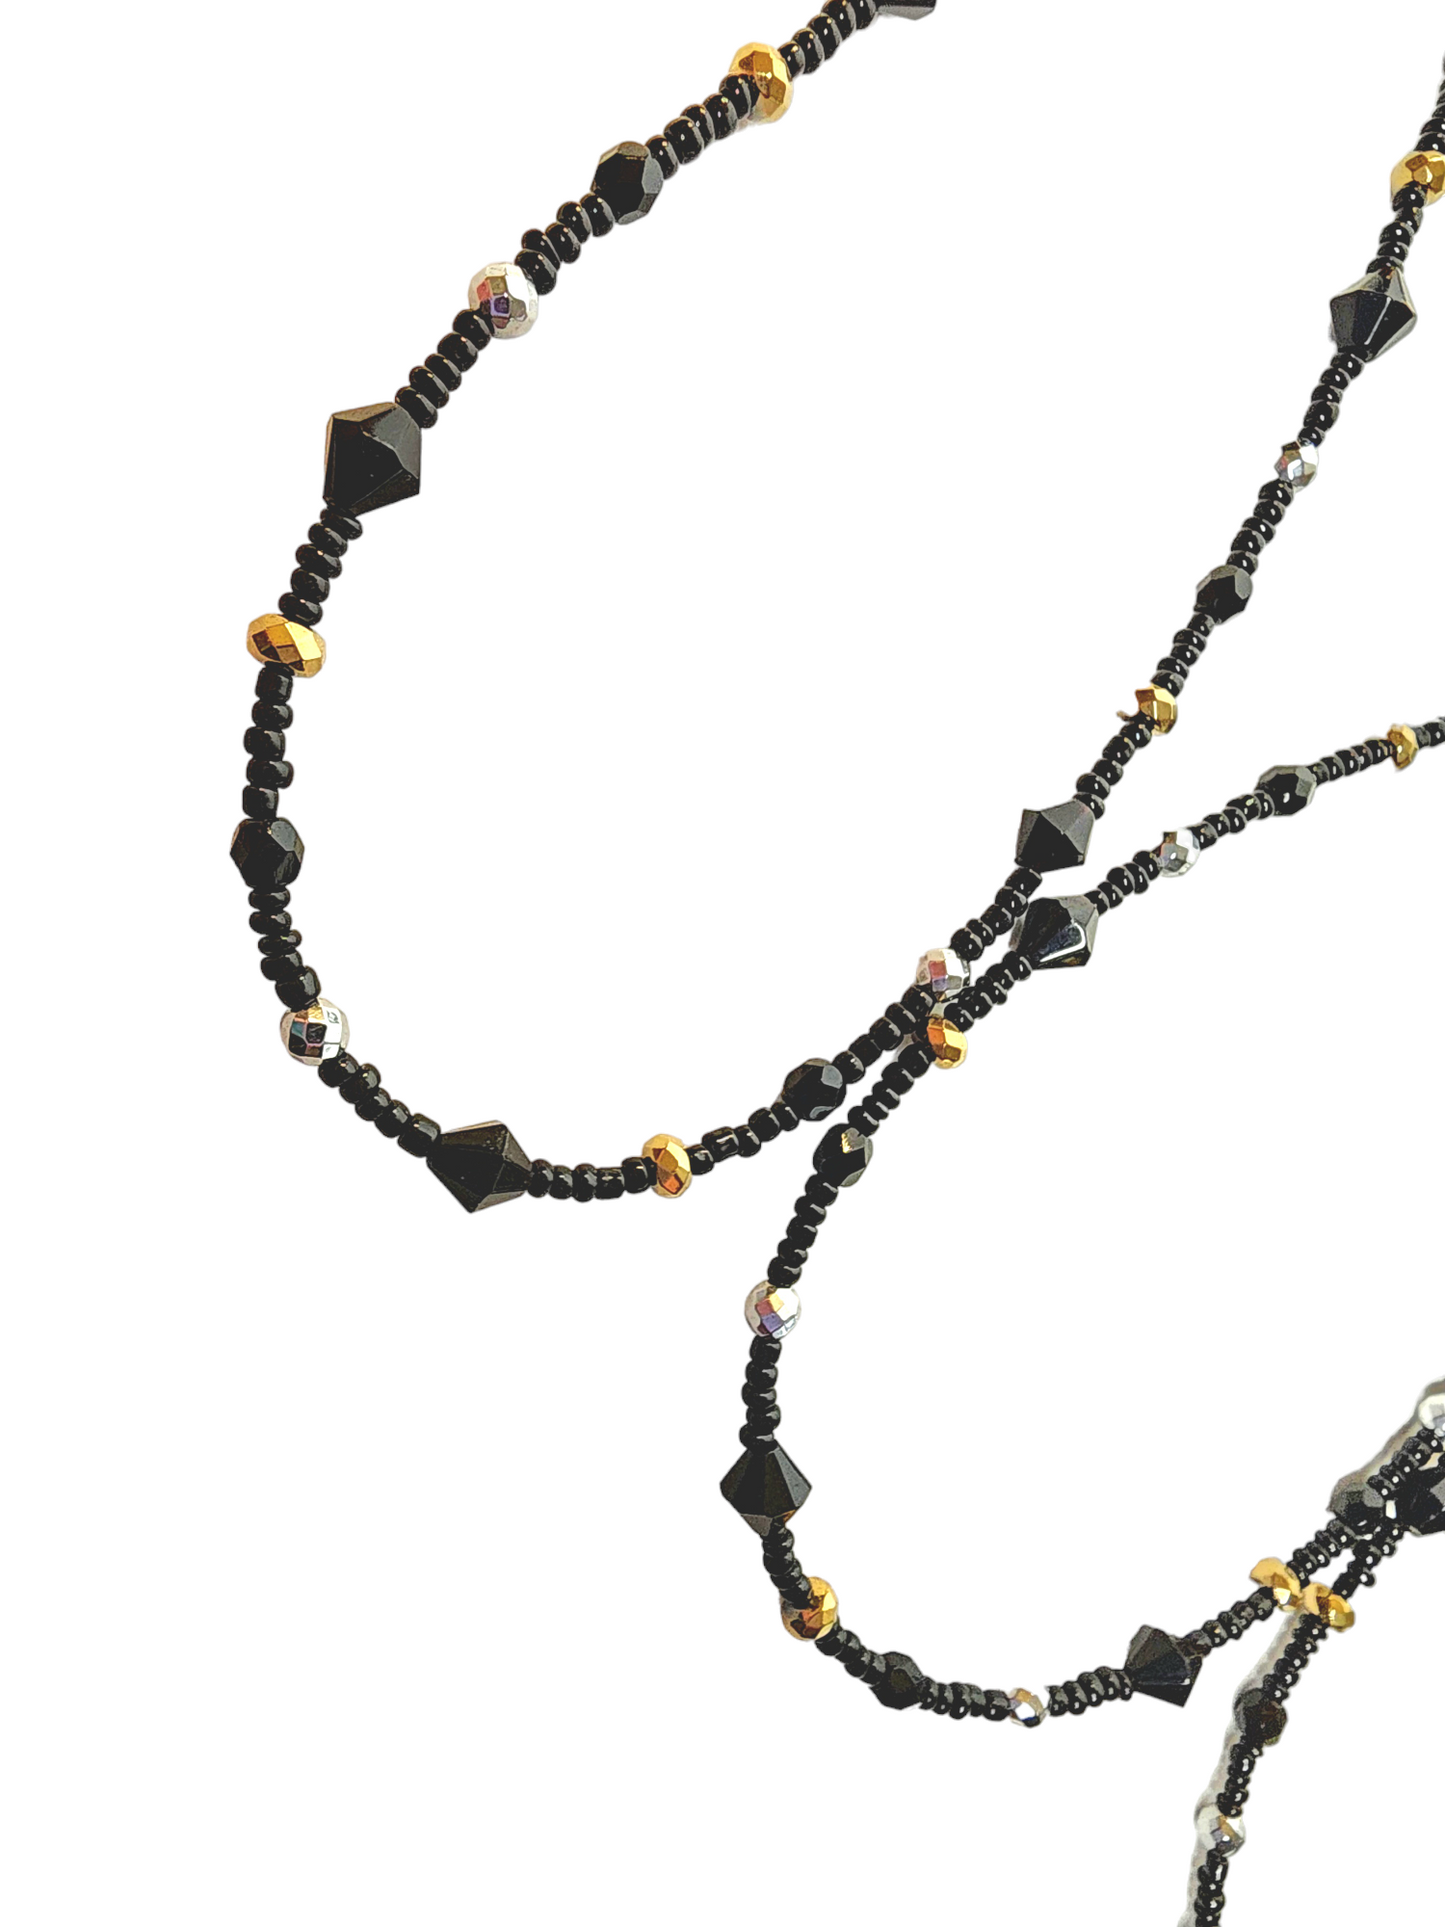 Deluxe Beaded Eyeglass Chain, Sparkly Black glass beads with Gold & Silver Hemalike beads.